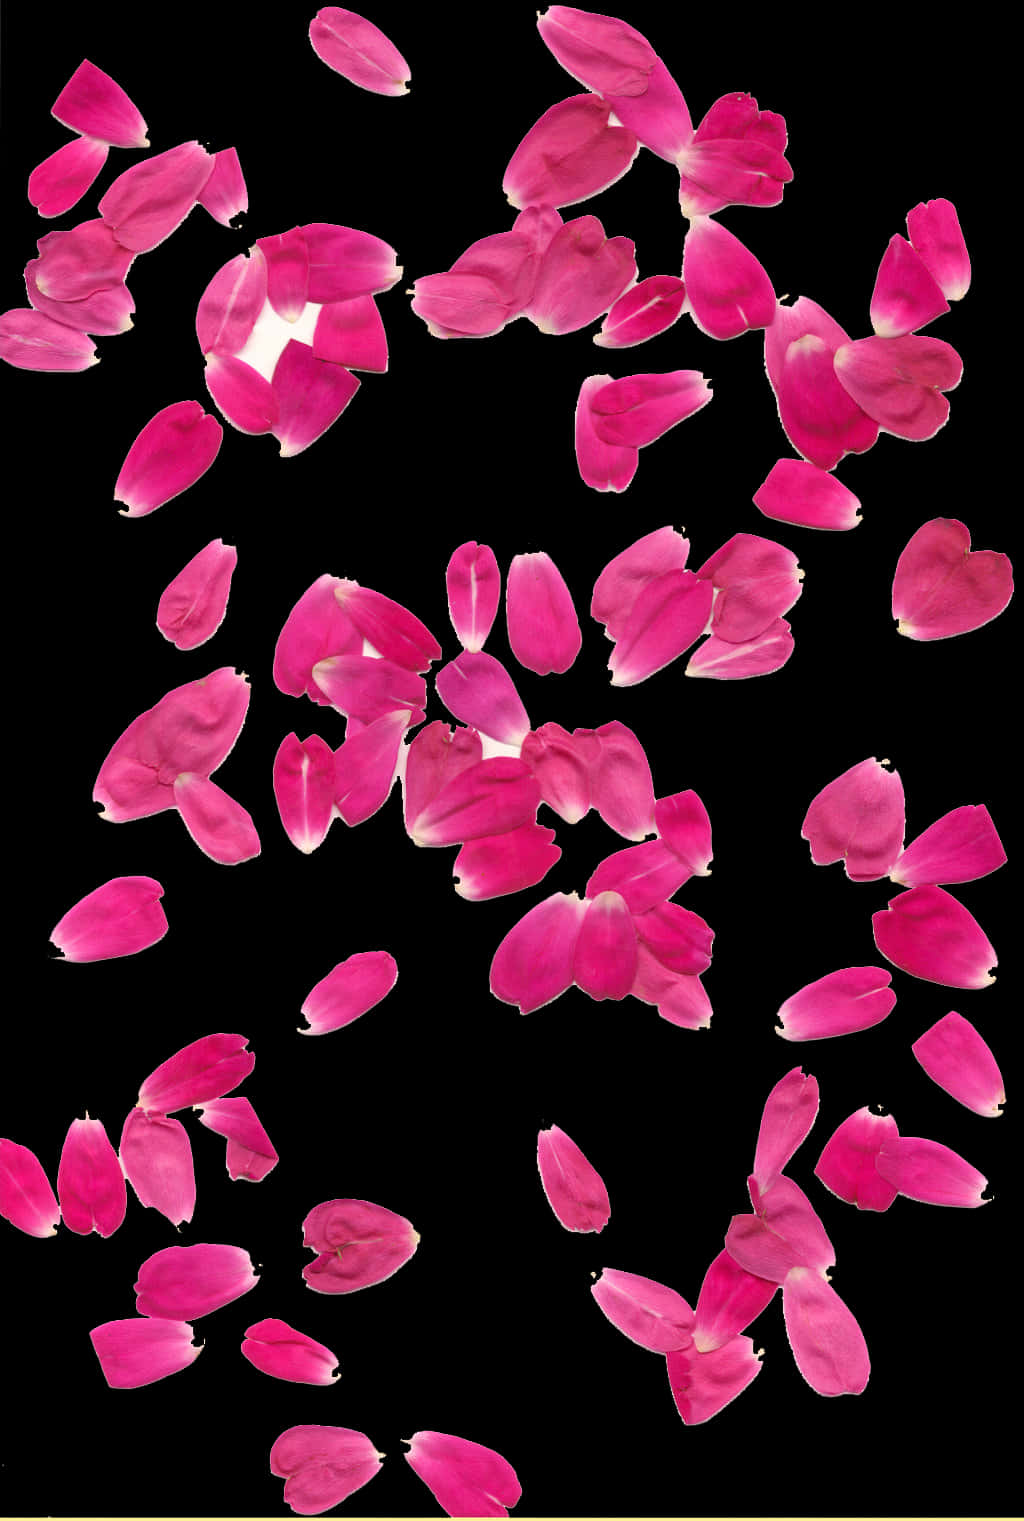 A Group Of Pink Petals On A Black Background